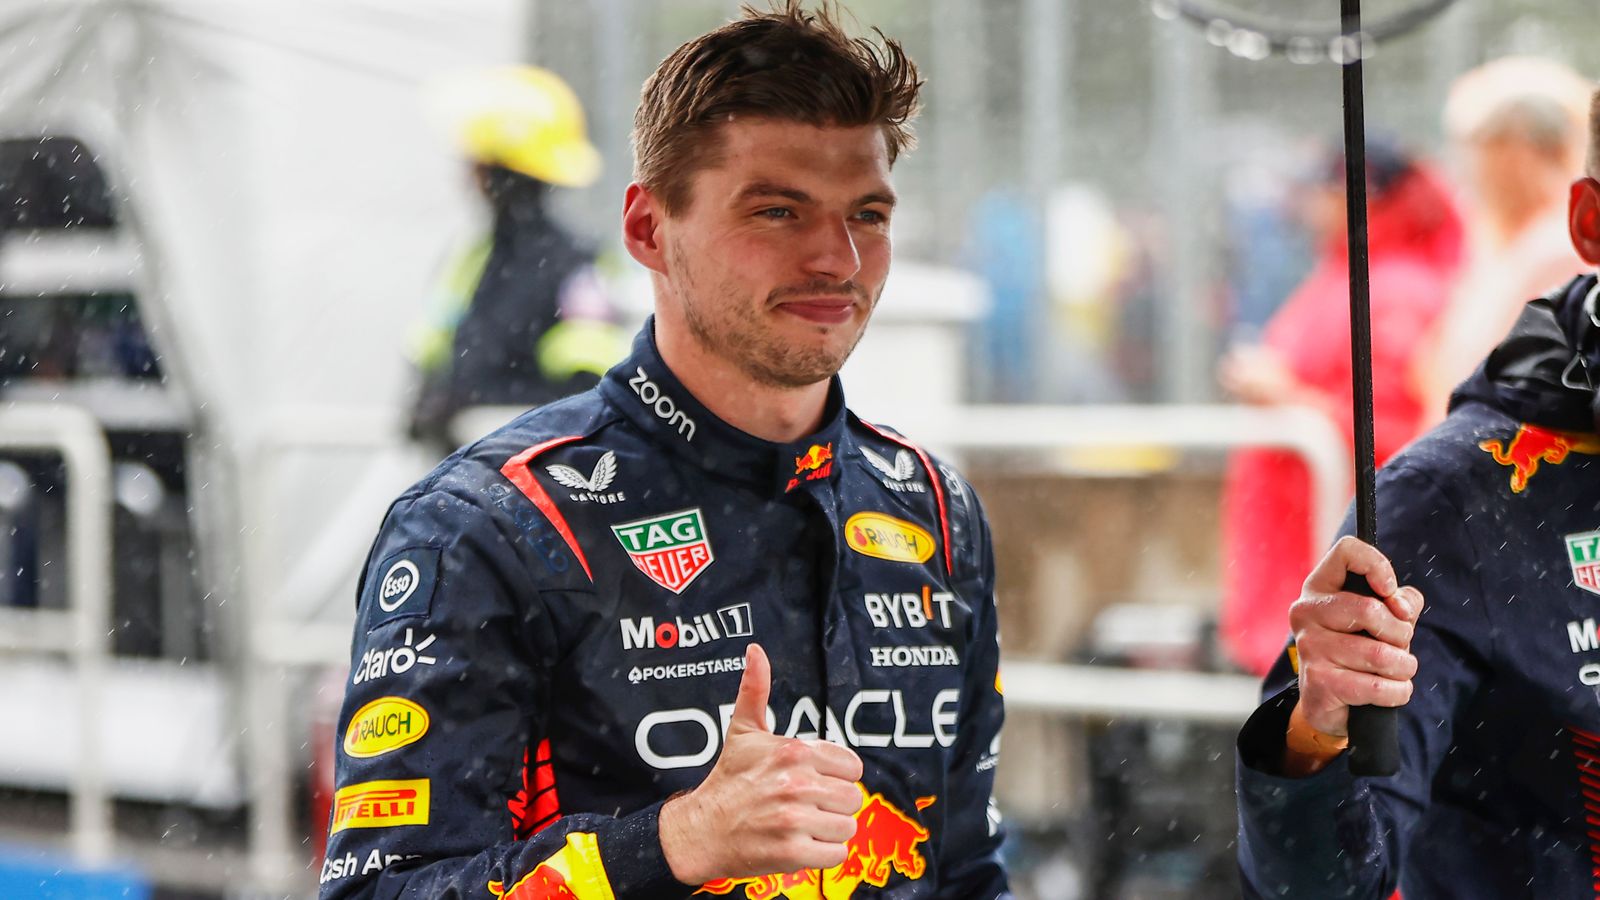 Canadian GP Qualifying: Max Verstappen on pole ahead of Fernando Alonso as Nico Hulkenberg gets grid penalty | F1 News